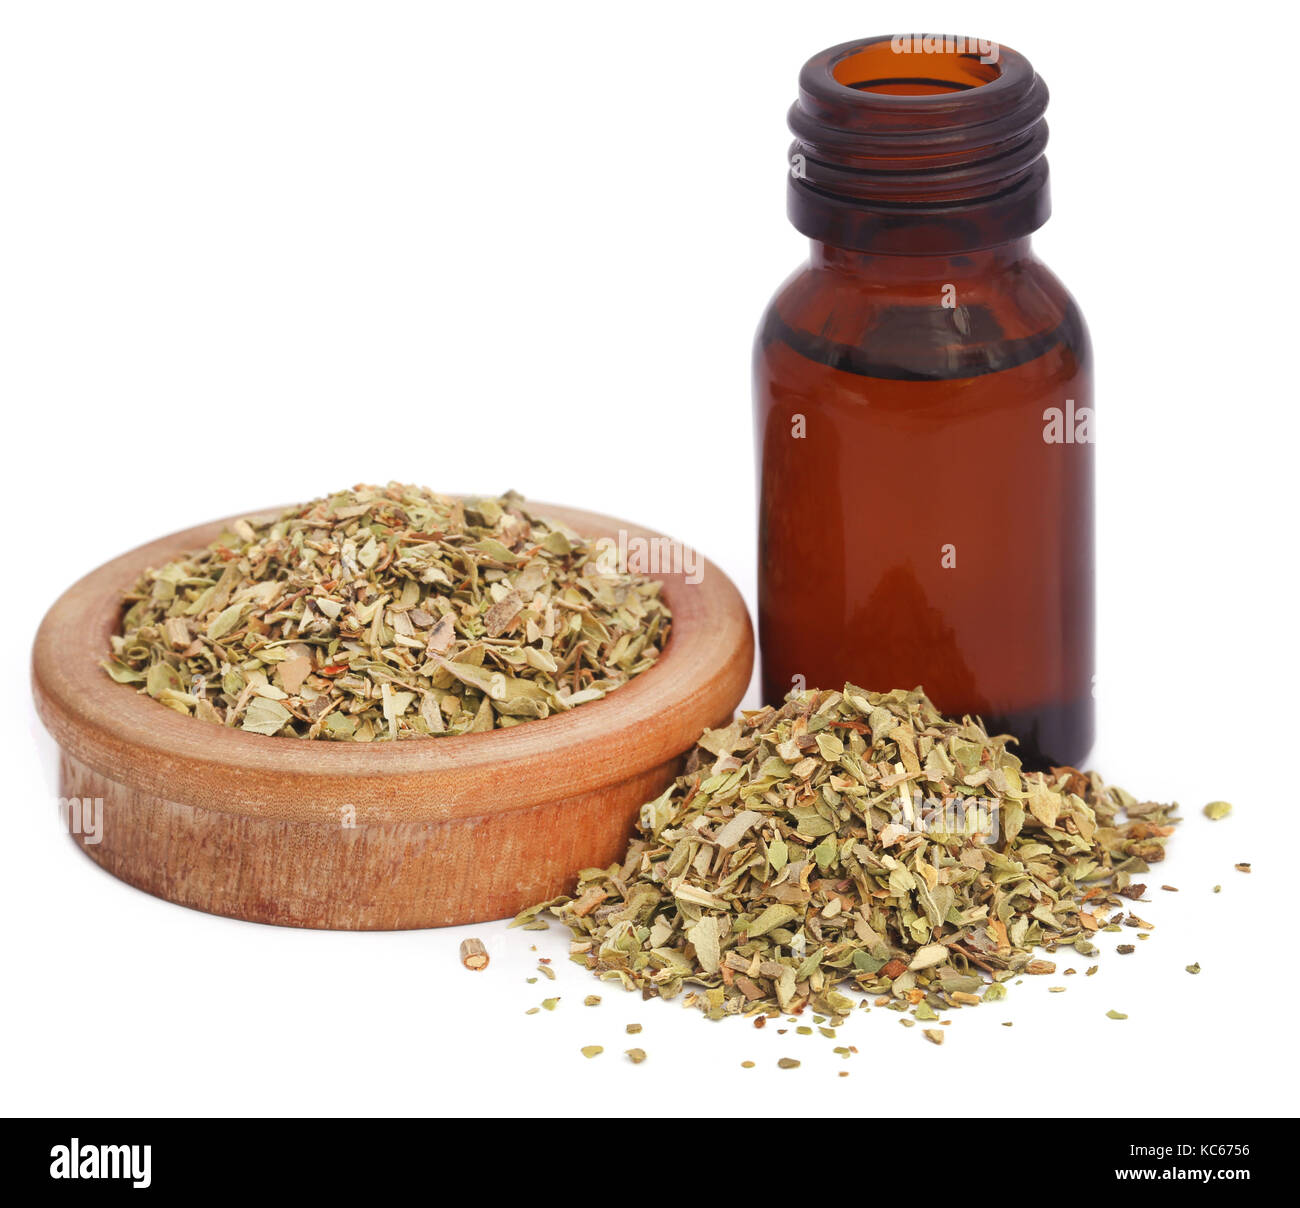 Dry oregano and essential oil in an amber bottle Stock Photo